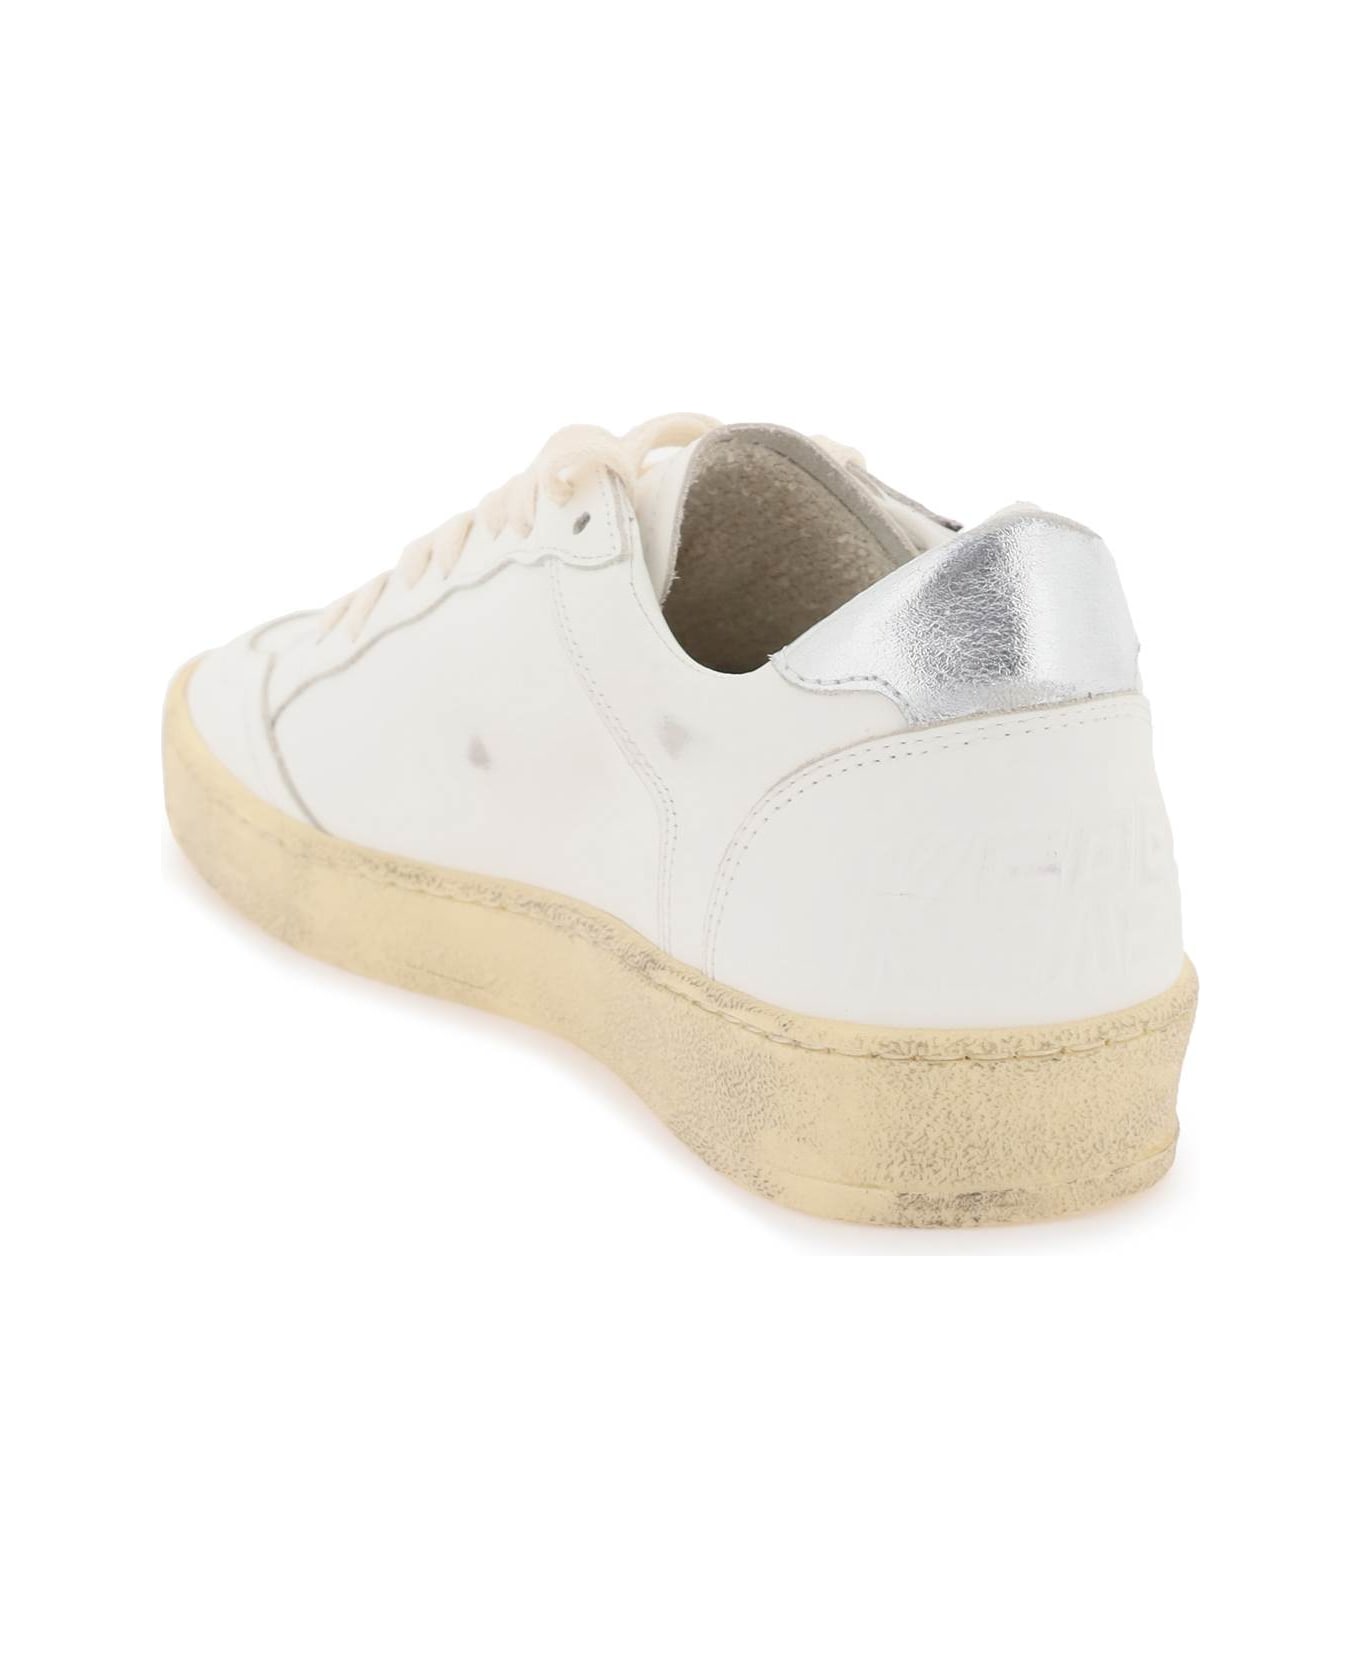 Golden Goose Leather Ball Star Sneakers - WHITE ICE SILVER (White)